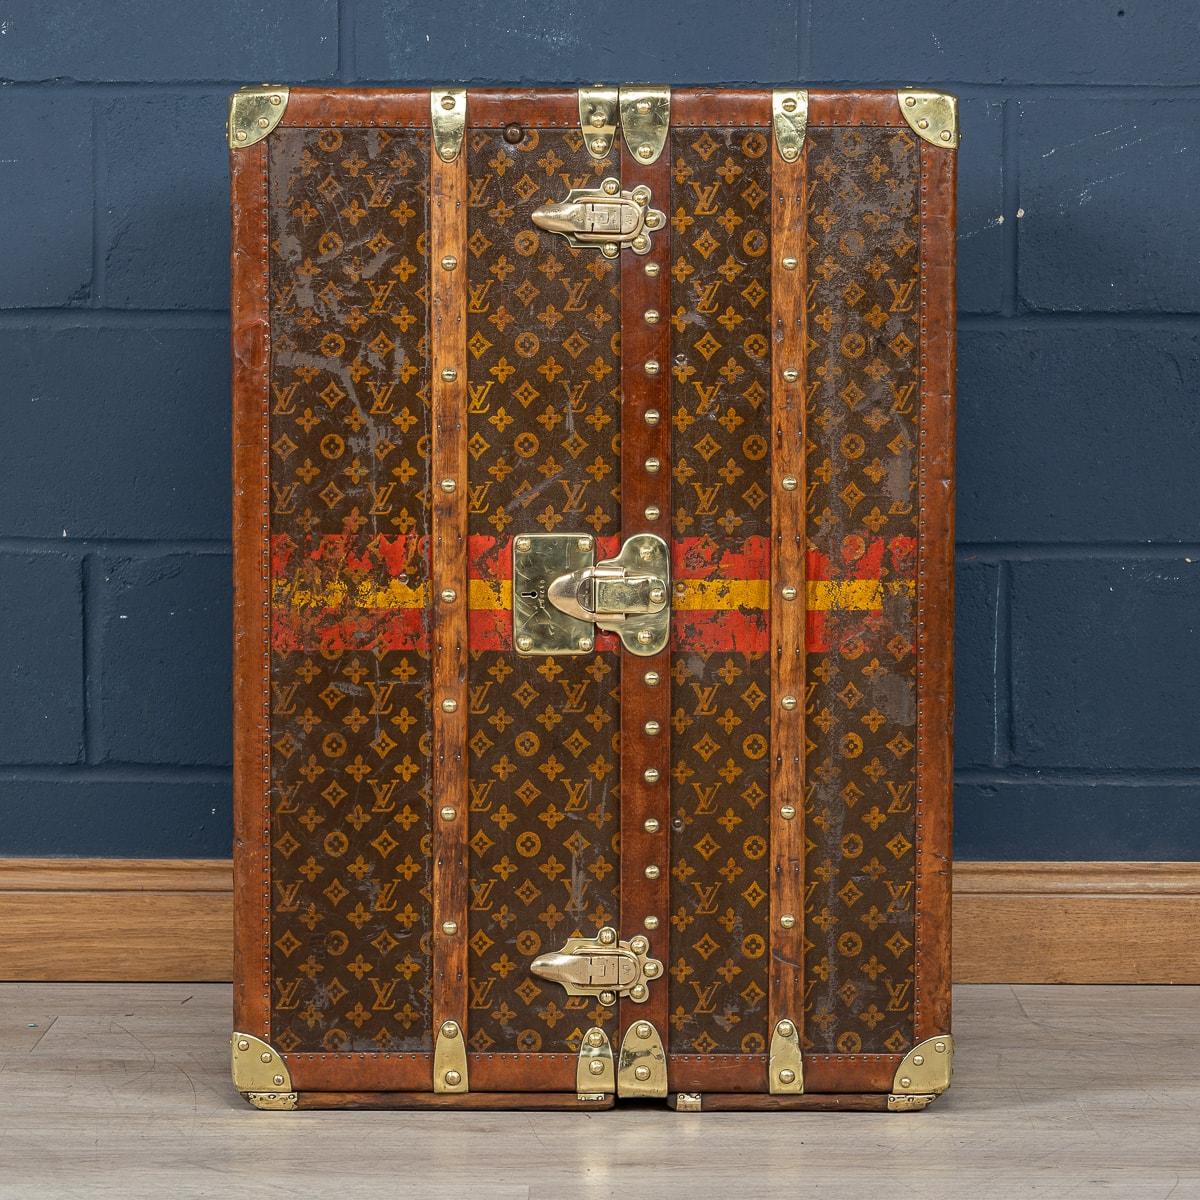 Stunning and extremely rare, this early 20th century Louis Vuitton wardrobe trunk was the must have item of any elite traveller. This never-been-seen-before trunk is covered in the world famous LV monogrammed canvas, with its lozine borders and